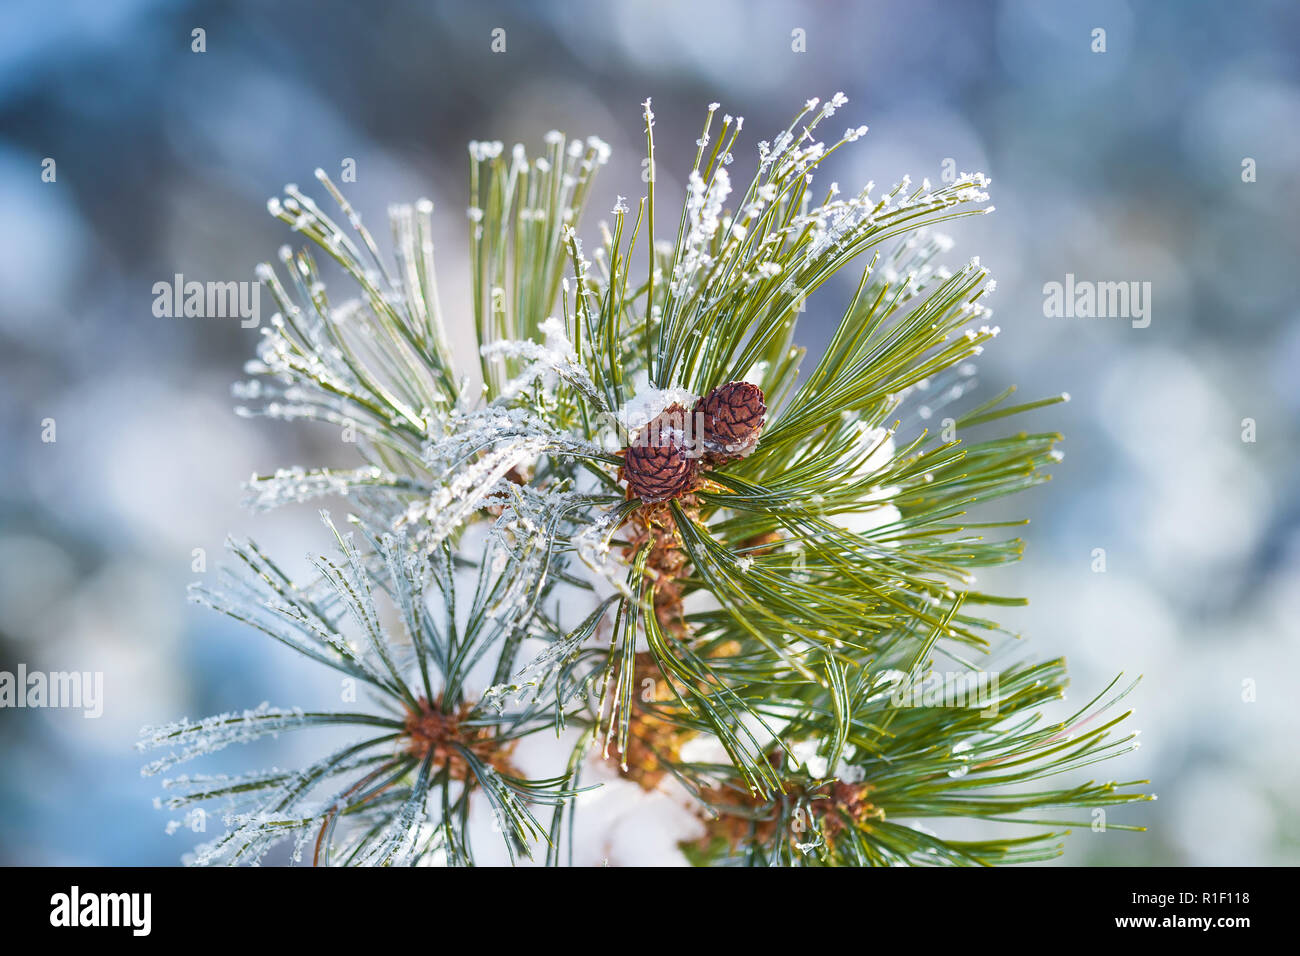 Branch elfin cedar with cones, snow-capped, closeup on the blurry background. Stock Photo